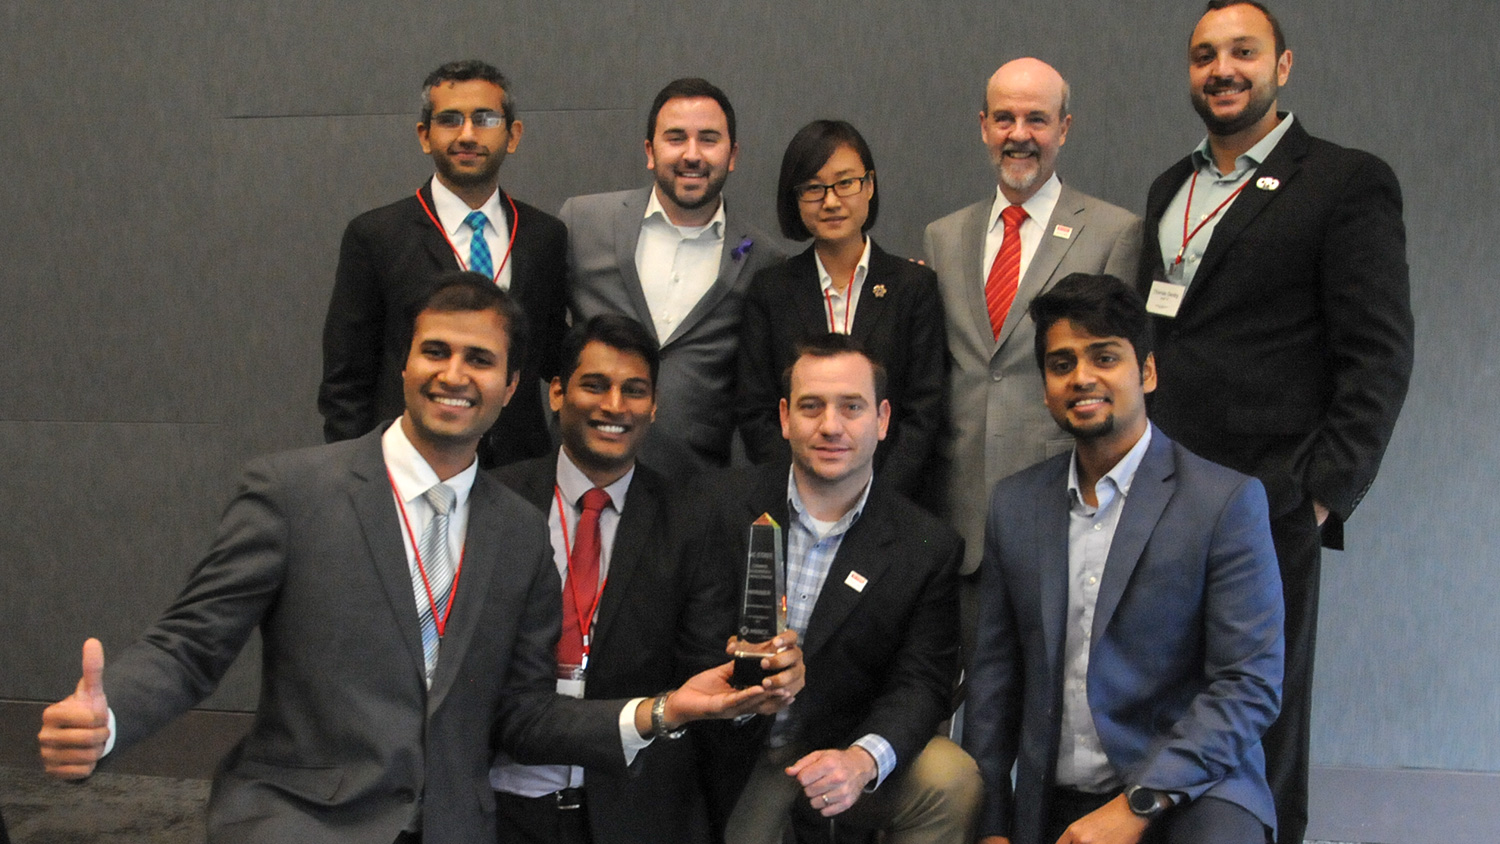 Photo of First place Boston University Questrom School of Business MBA students with their NC State Jenkins MBA 'assist' team